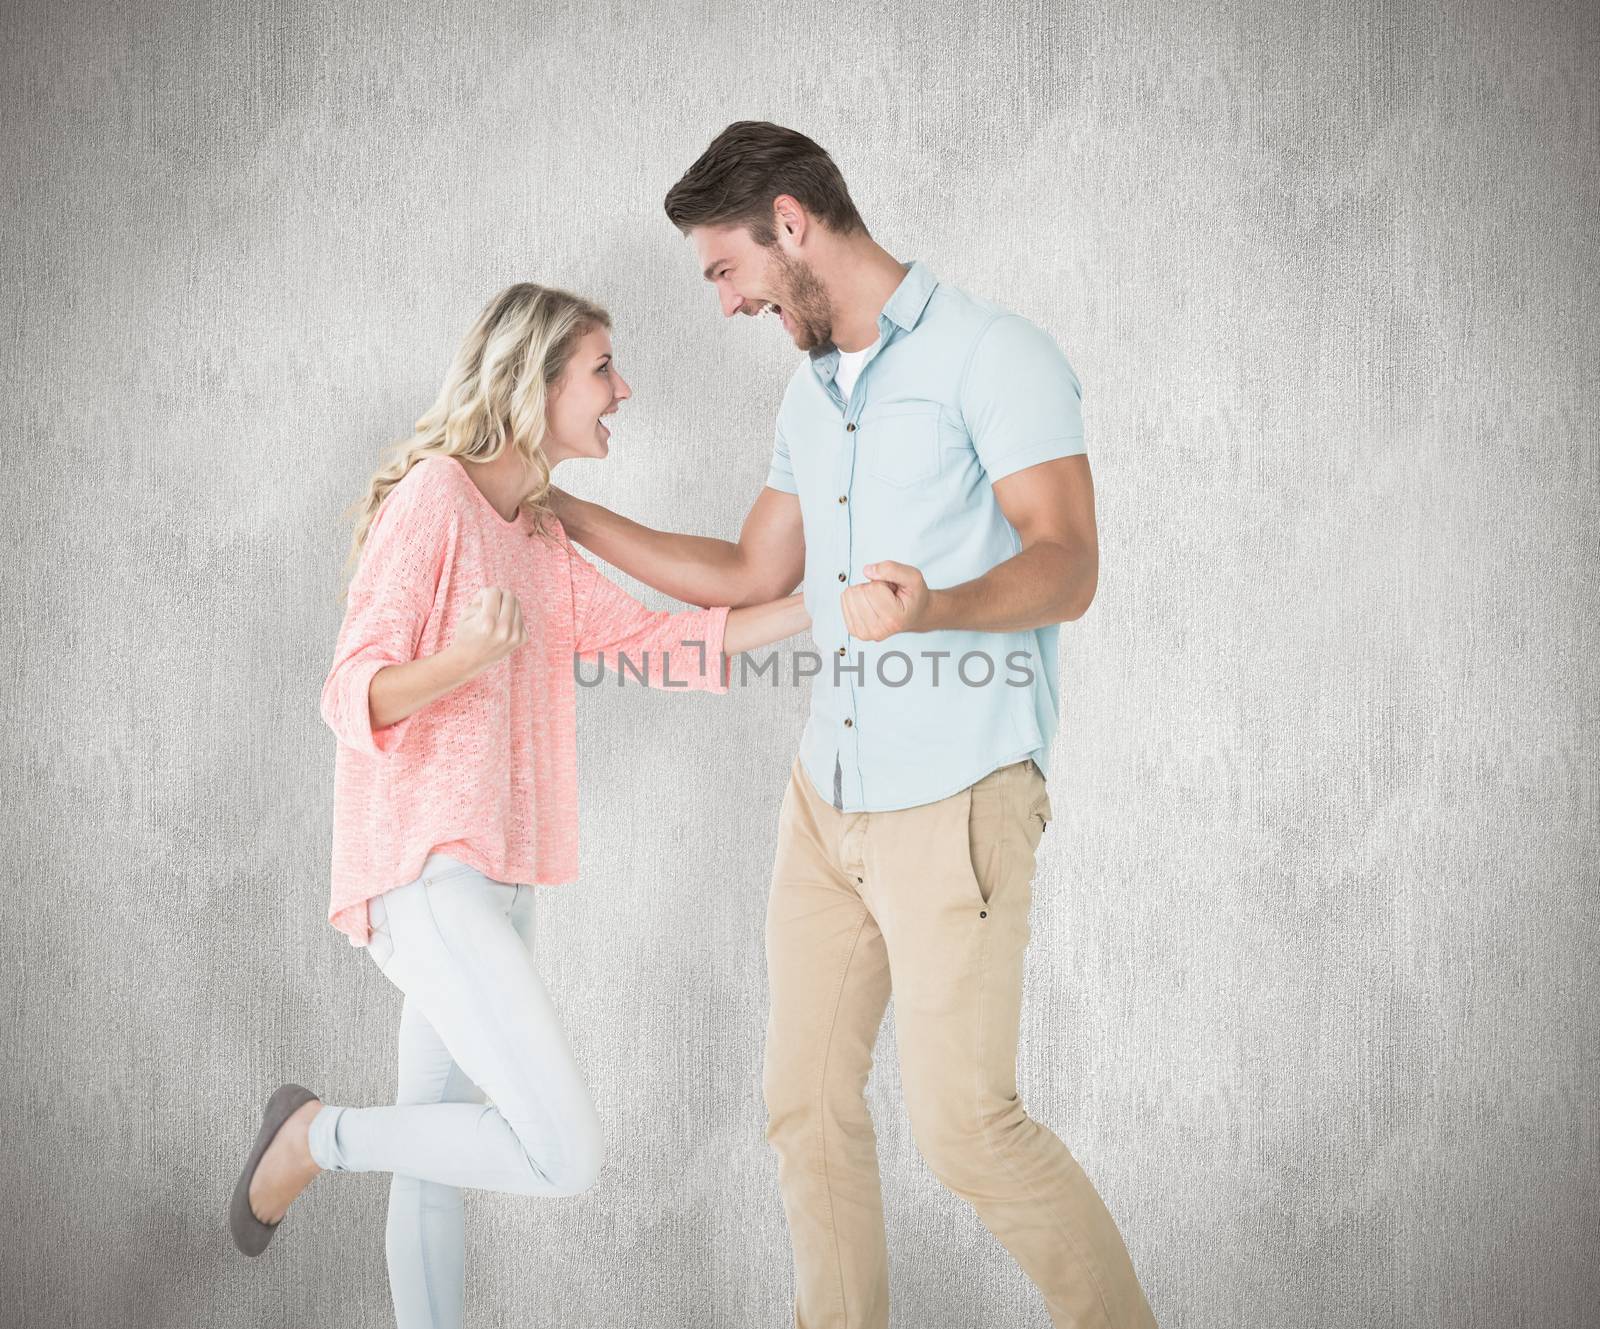 Attractive couple smiling and cheering against white background